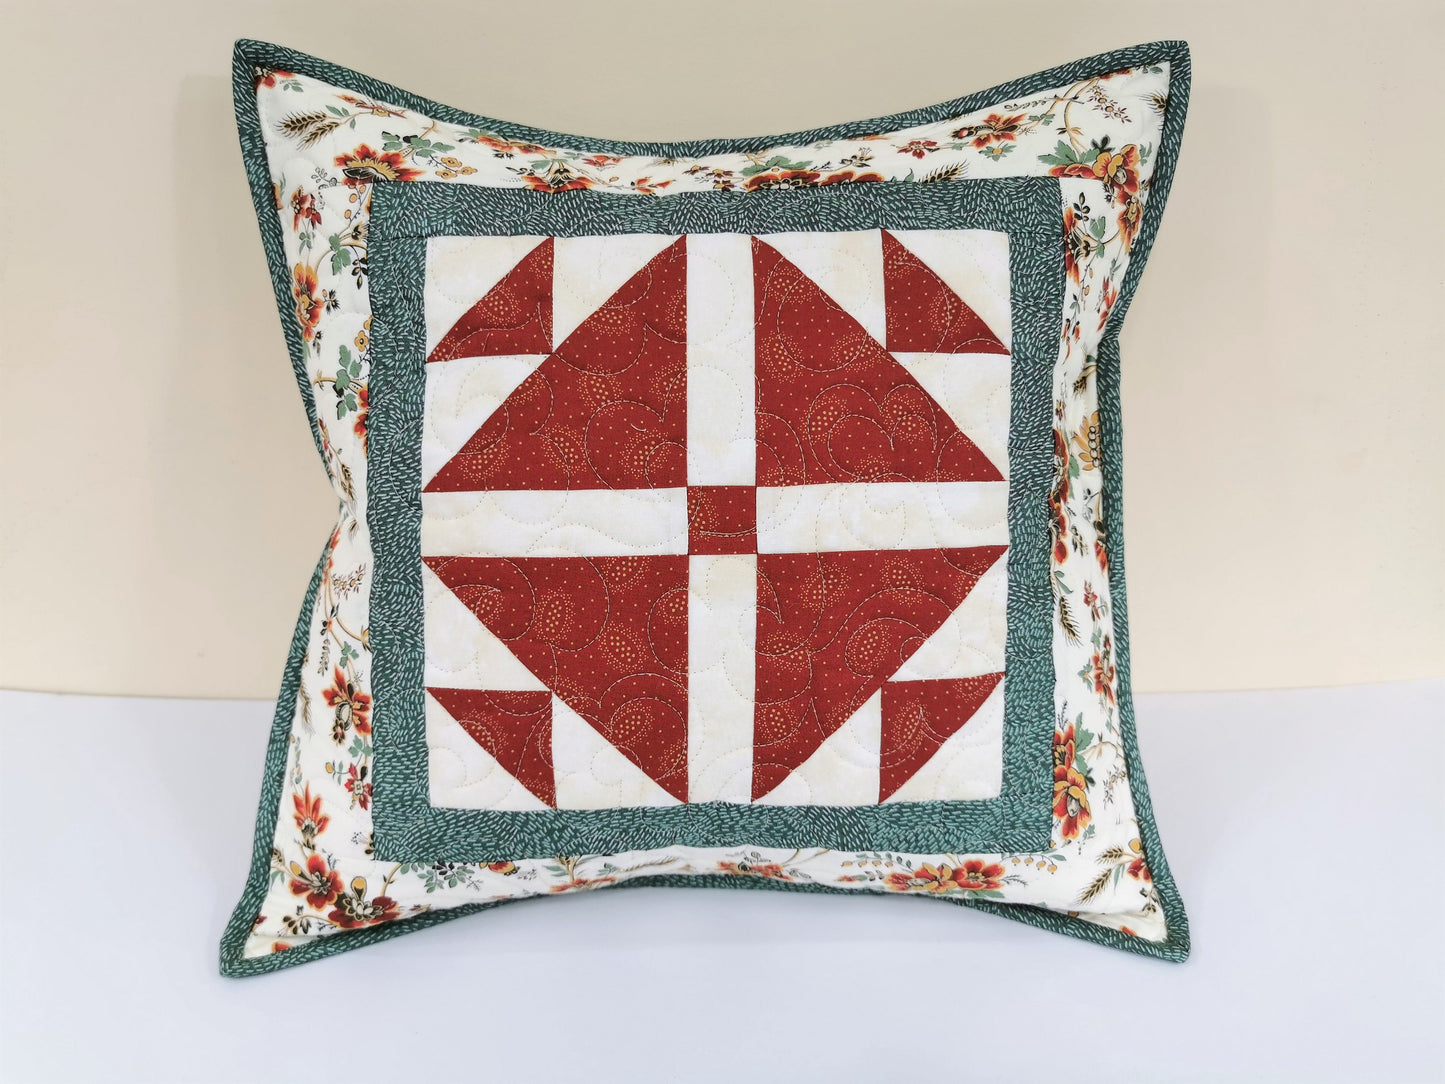 This quilted throw pillow has striking red and white patchwork in the center set off by a teal border. The pretty floral border that finishes the pillow mirrors the teal and red patchwork for a beautiful coordinated look.